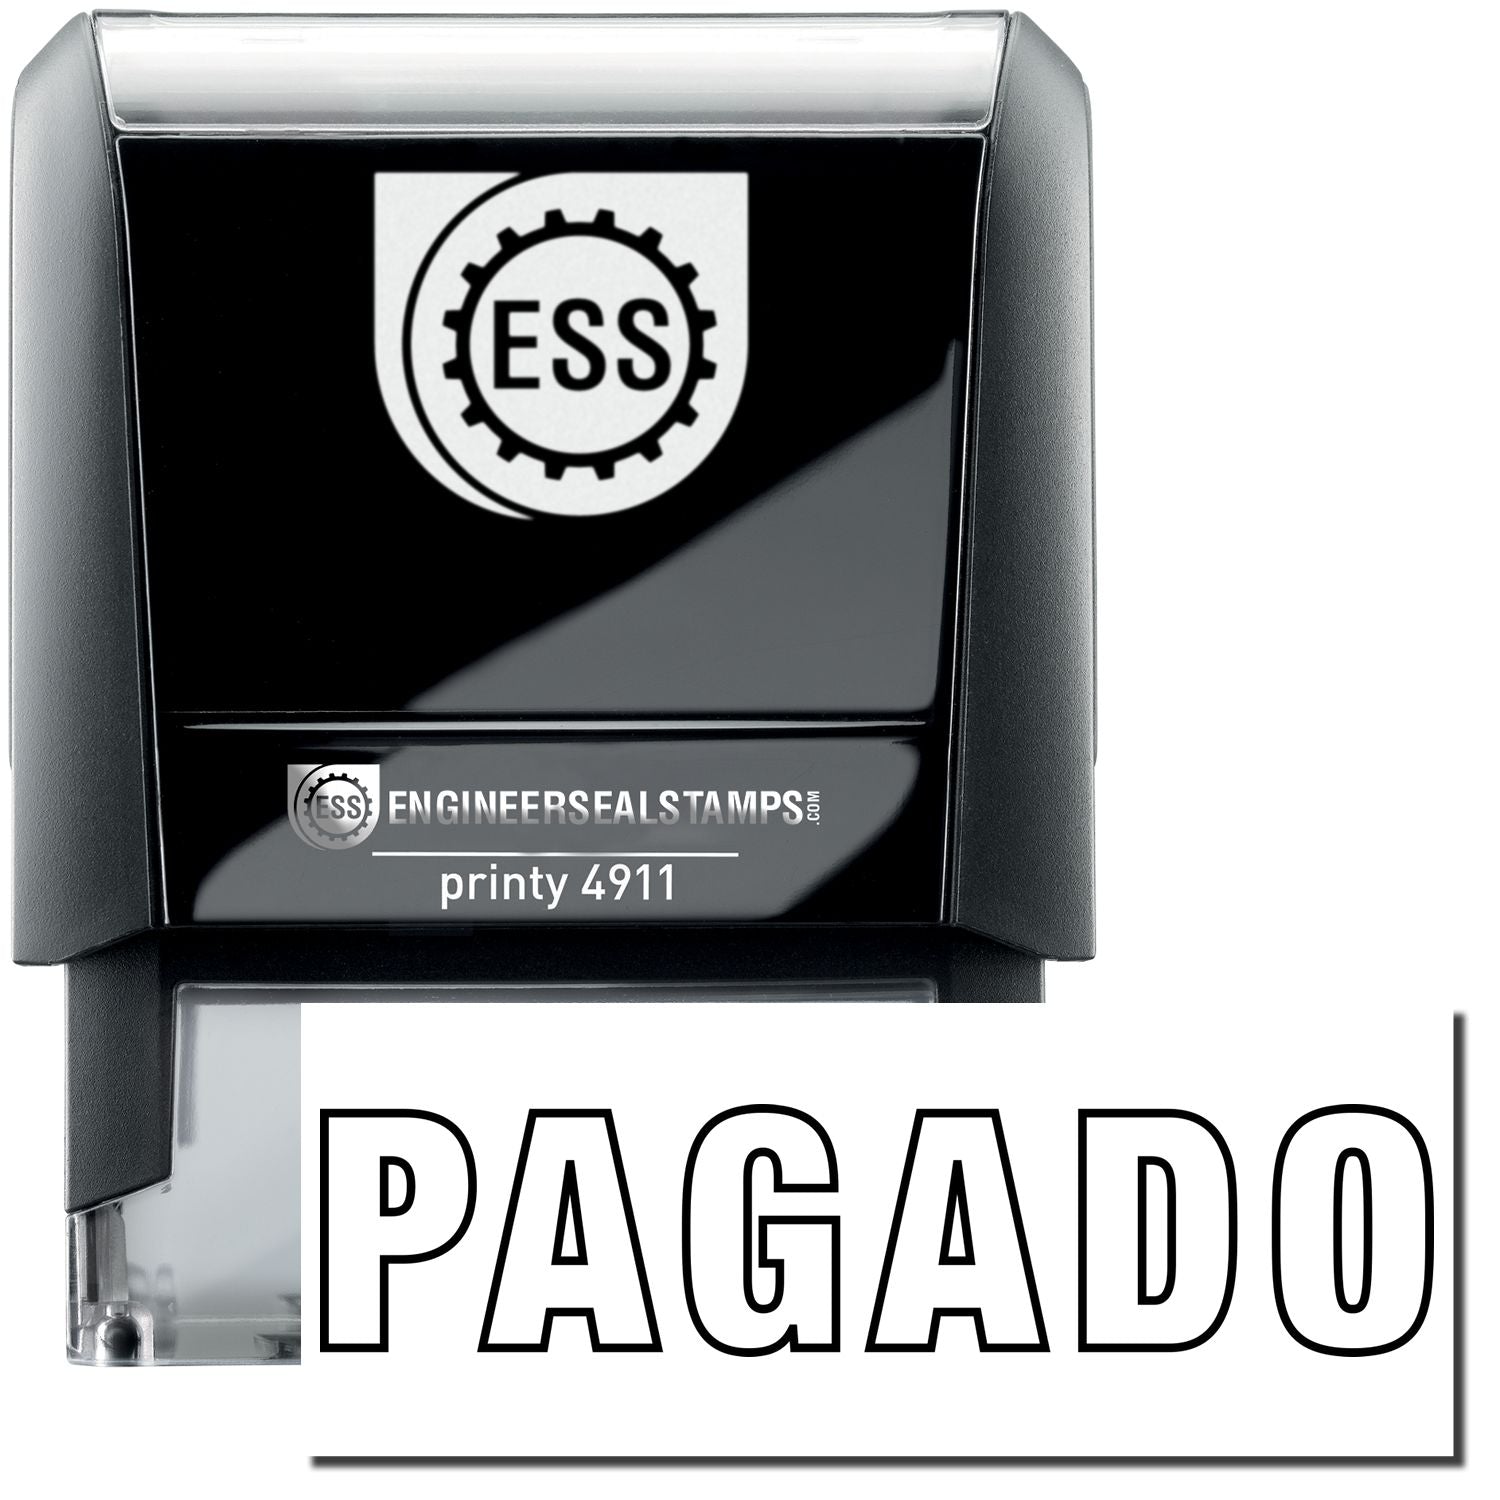 A self-inking stamp with a stamped image showing how the text "PAGADO" in an outline style is displayed after stamping.